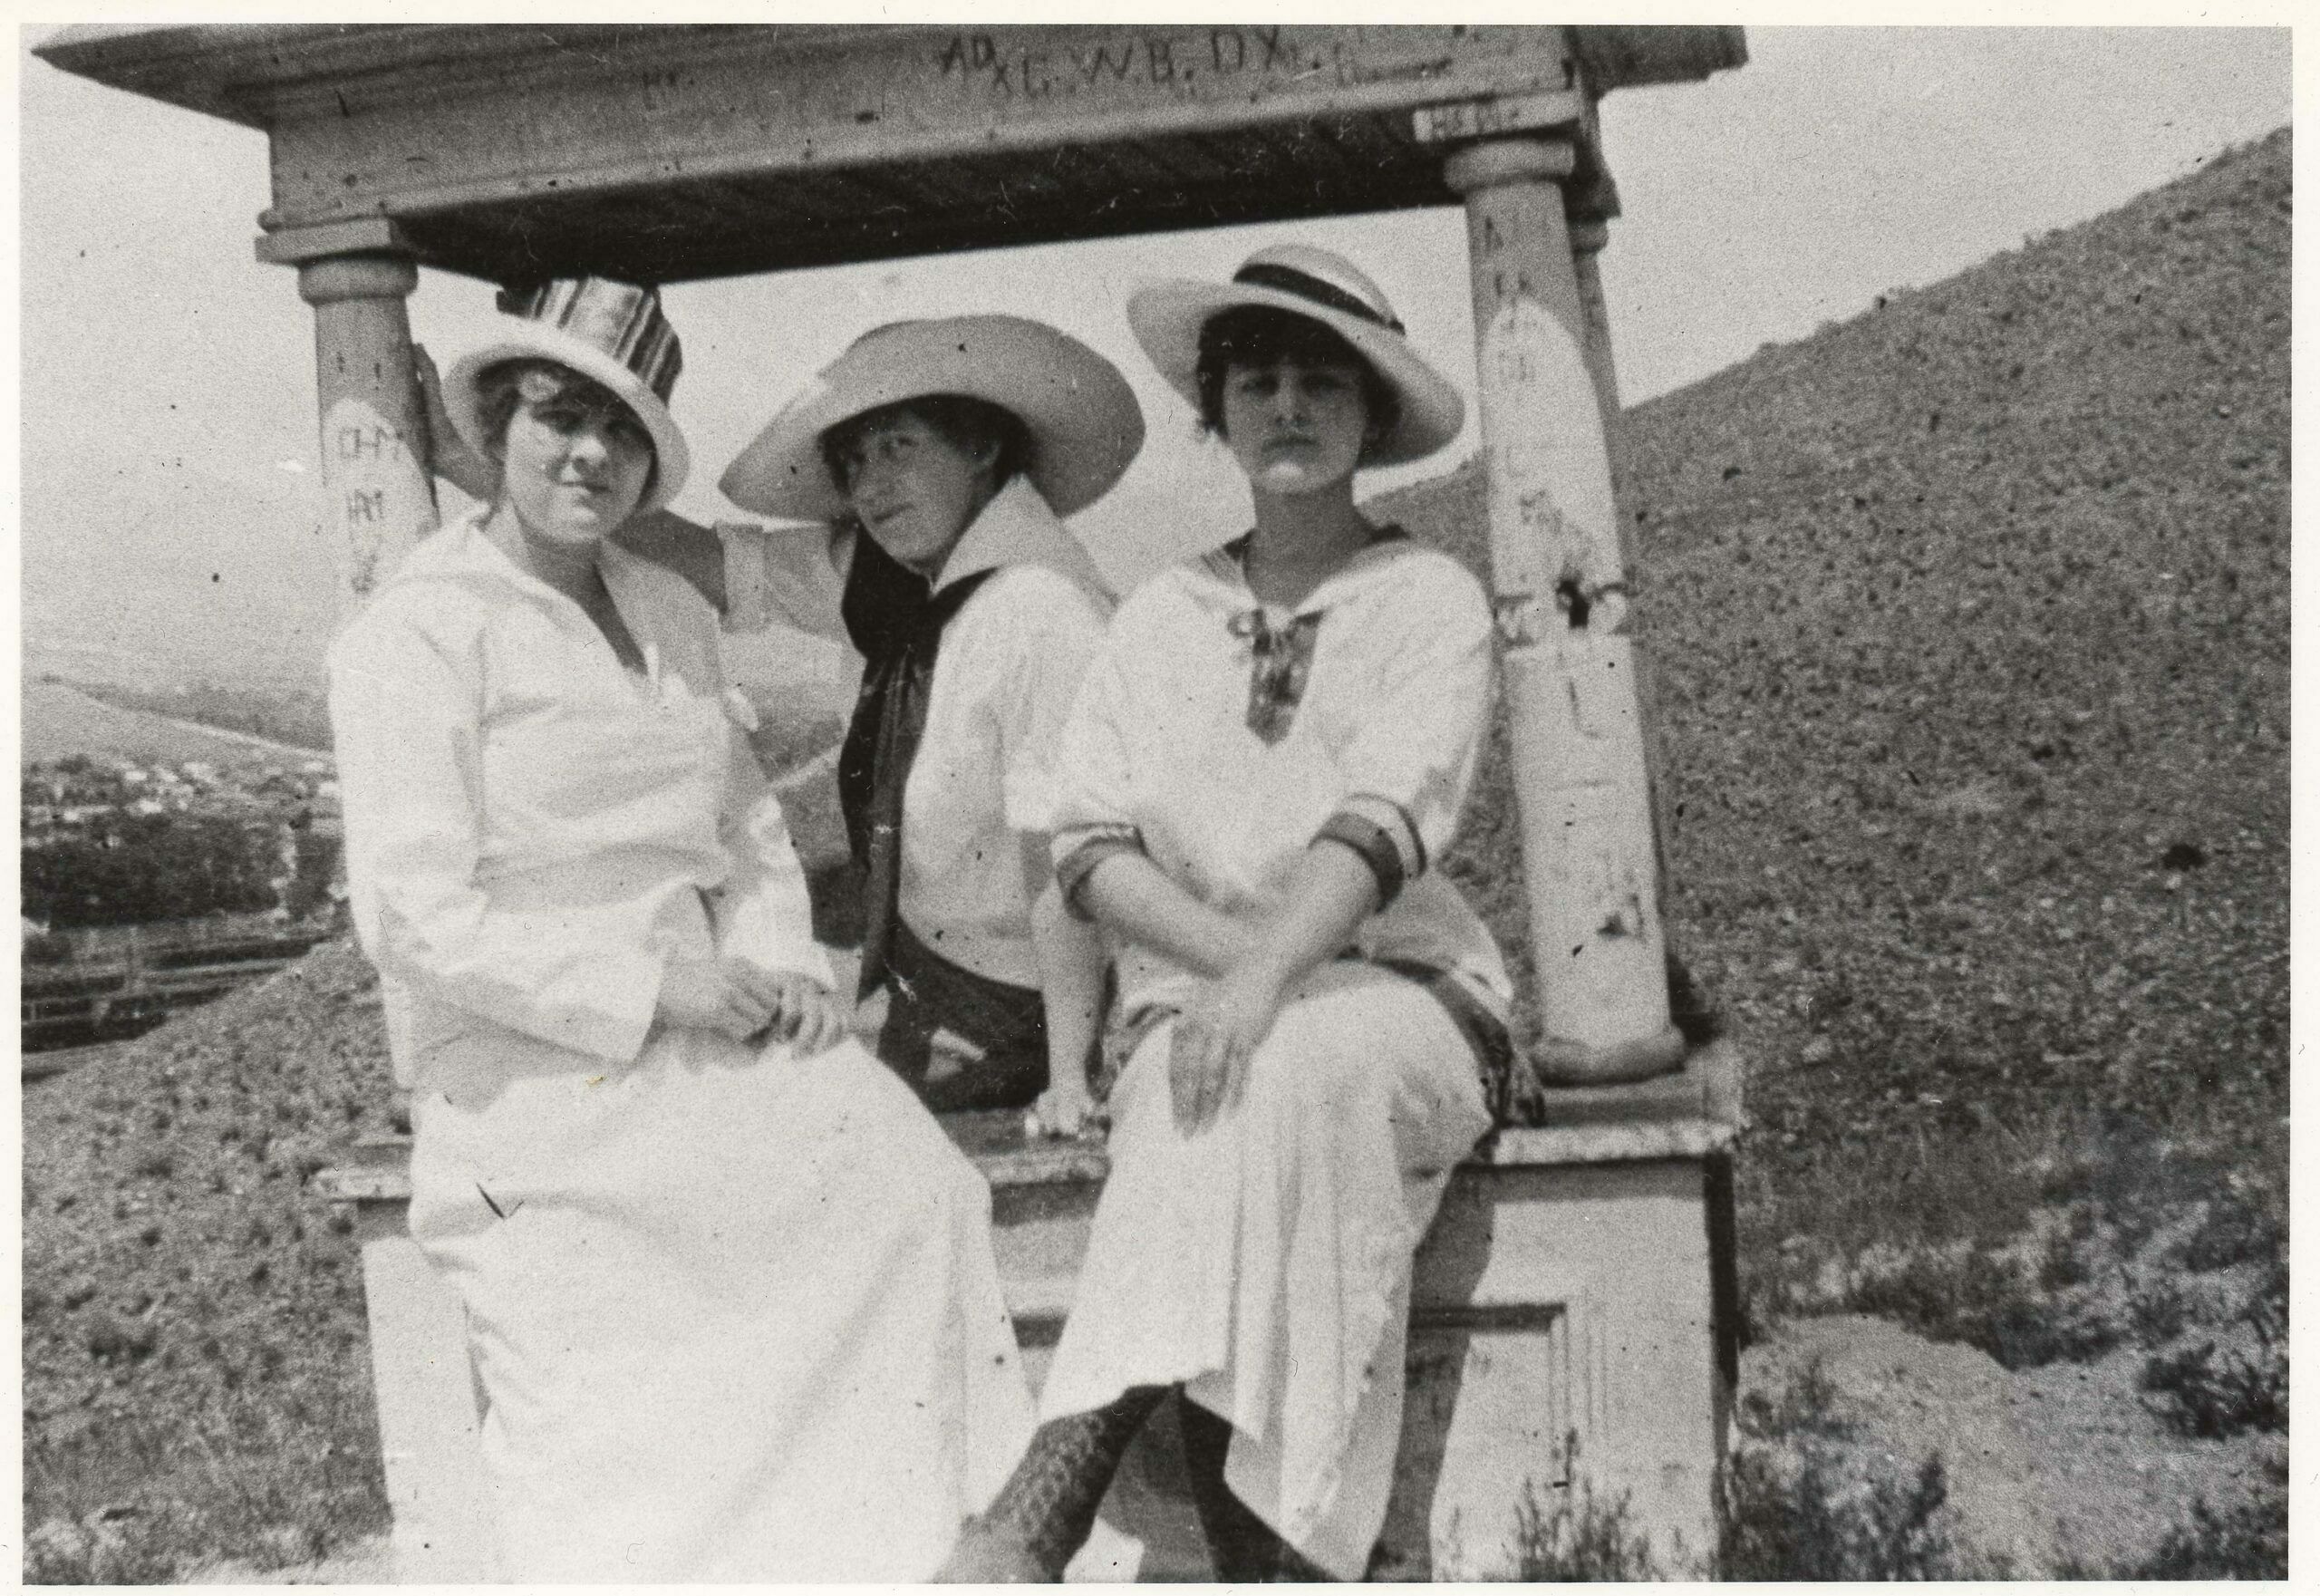 Although damaged and vandalized, pillars supporting the roof over the grave of Duke remained in place in the early 1920s when this trio of young Salida women (Nina Churcher (Thomson) on right) visited the monument on their way to a picnic at the Crater, a popular Sunday hiking destination.  (3)